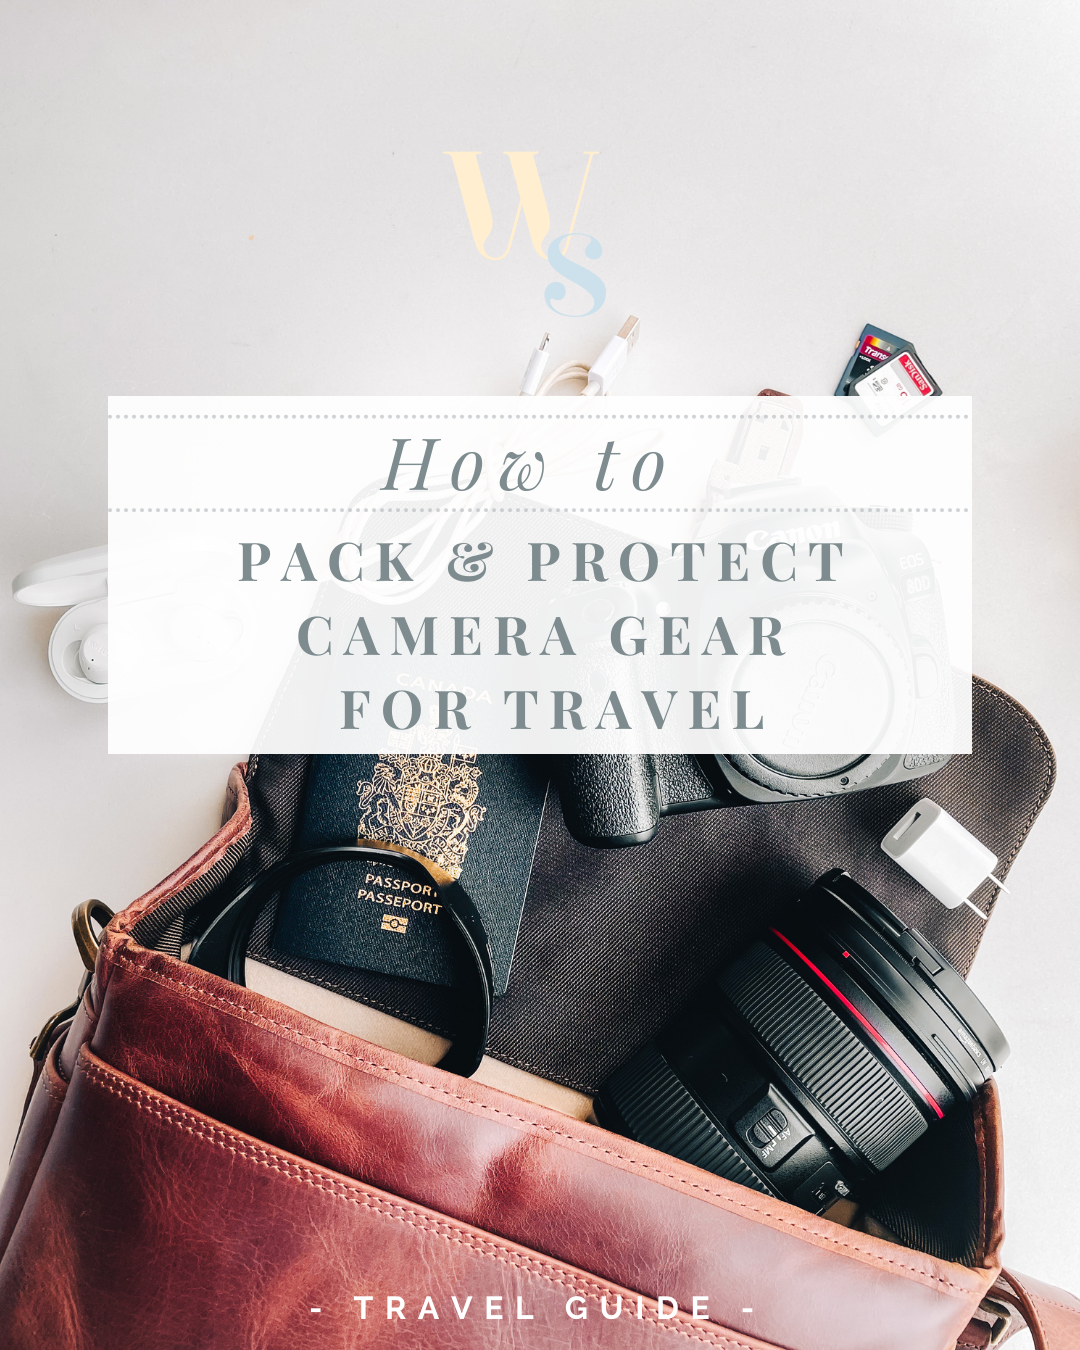 3 tips to keep camera gear safe while travelling